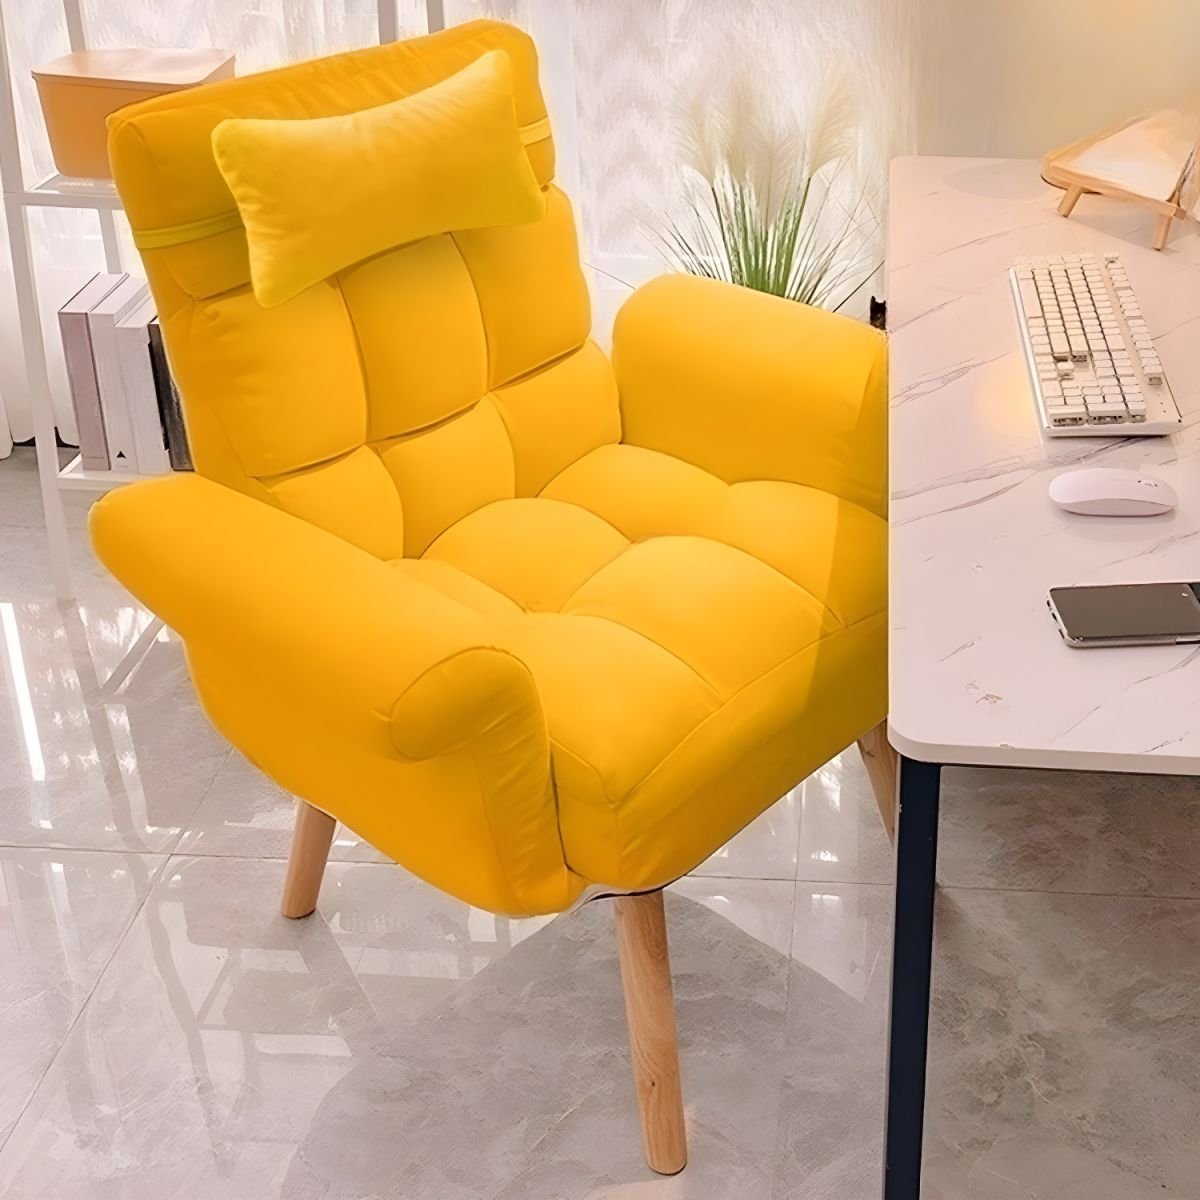 Yellow Cotton Modern Standard Recliner Manual - Push Back with Ottoman and Partial Assembly Required - 31"L x 24"W x 36"H Yellow Deck Chair